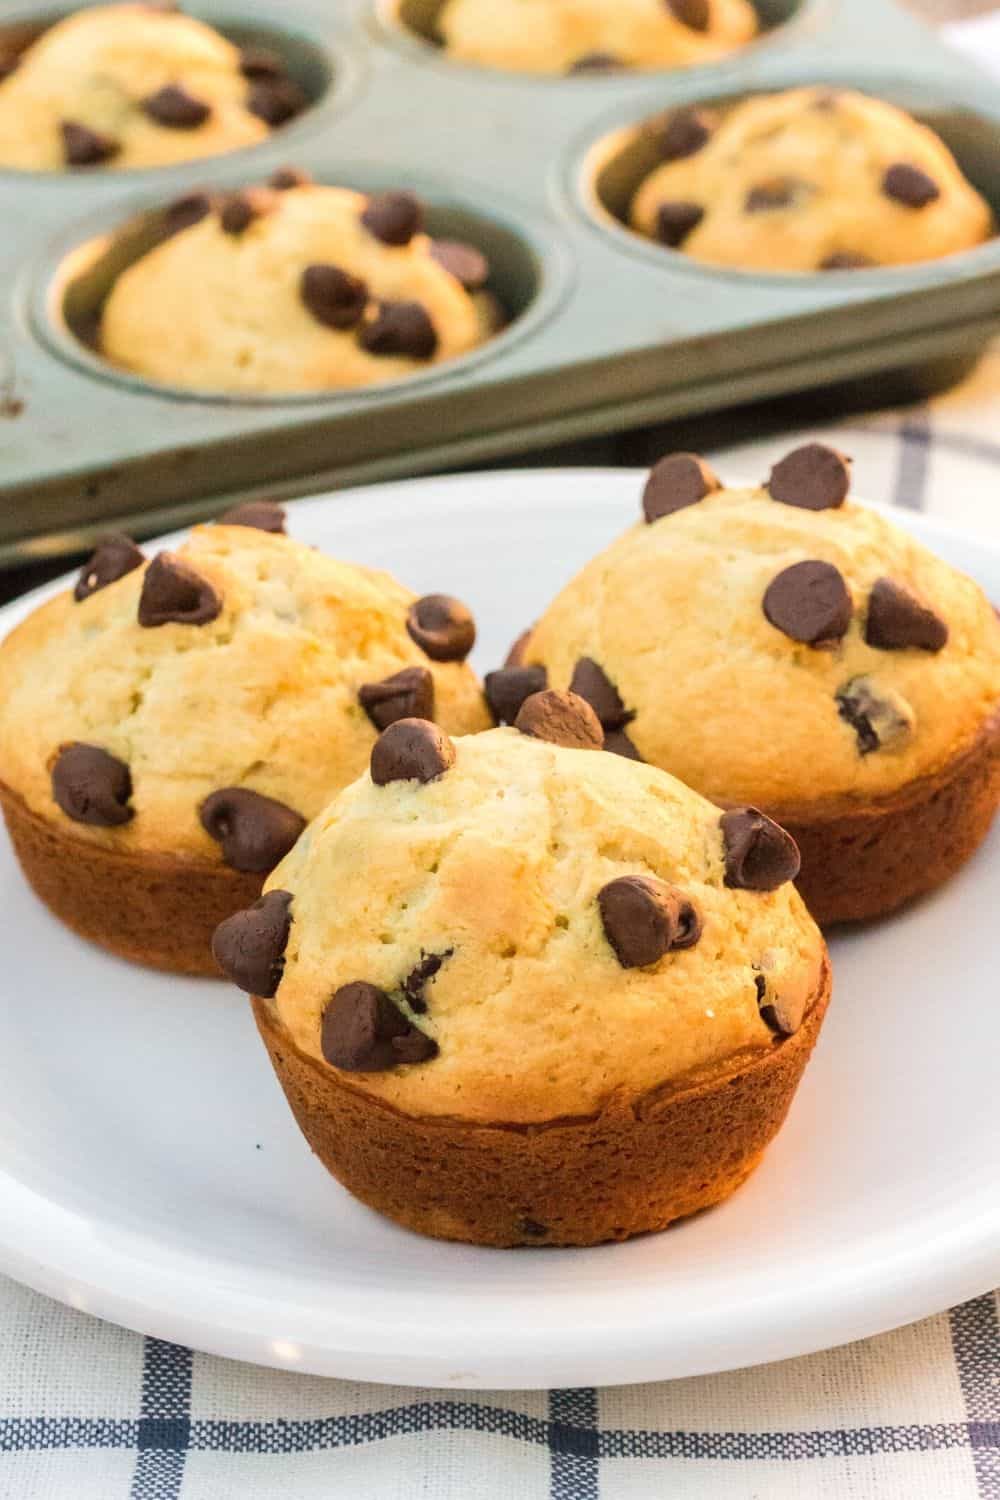 three bisquick chocolate chip muffins on a white plate, with the remainder of the muffins in the background